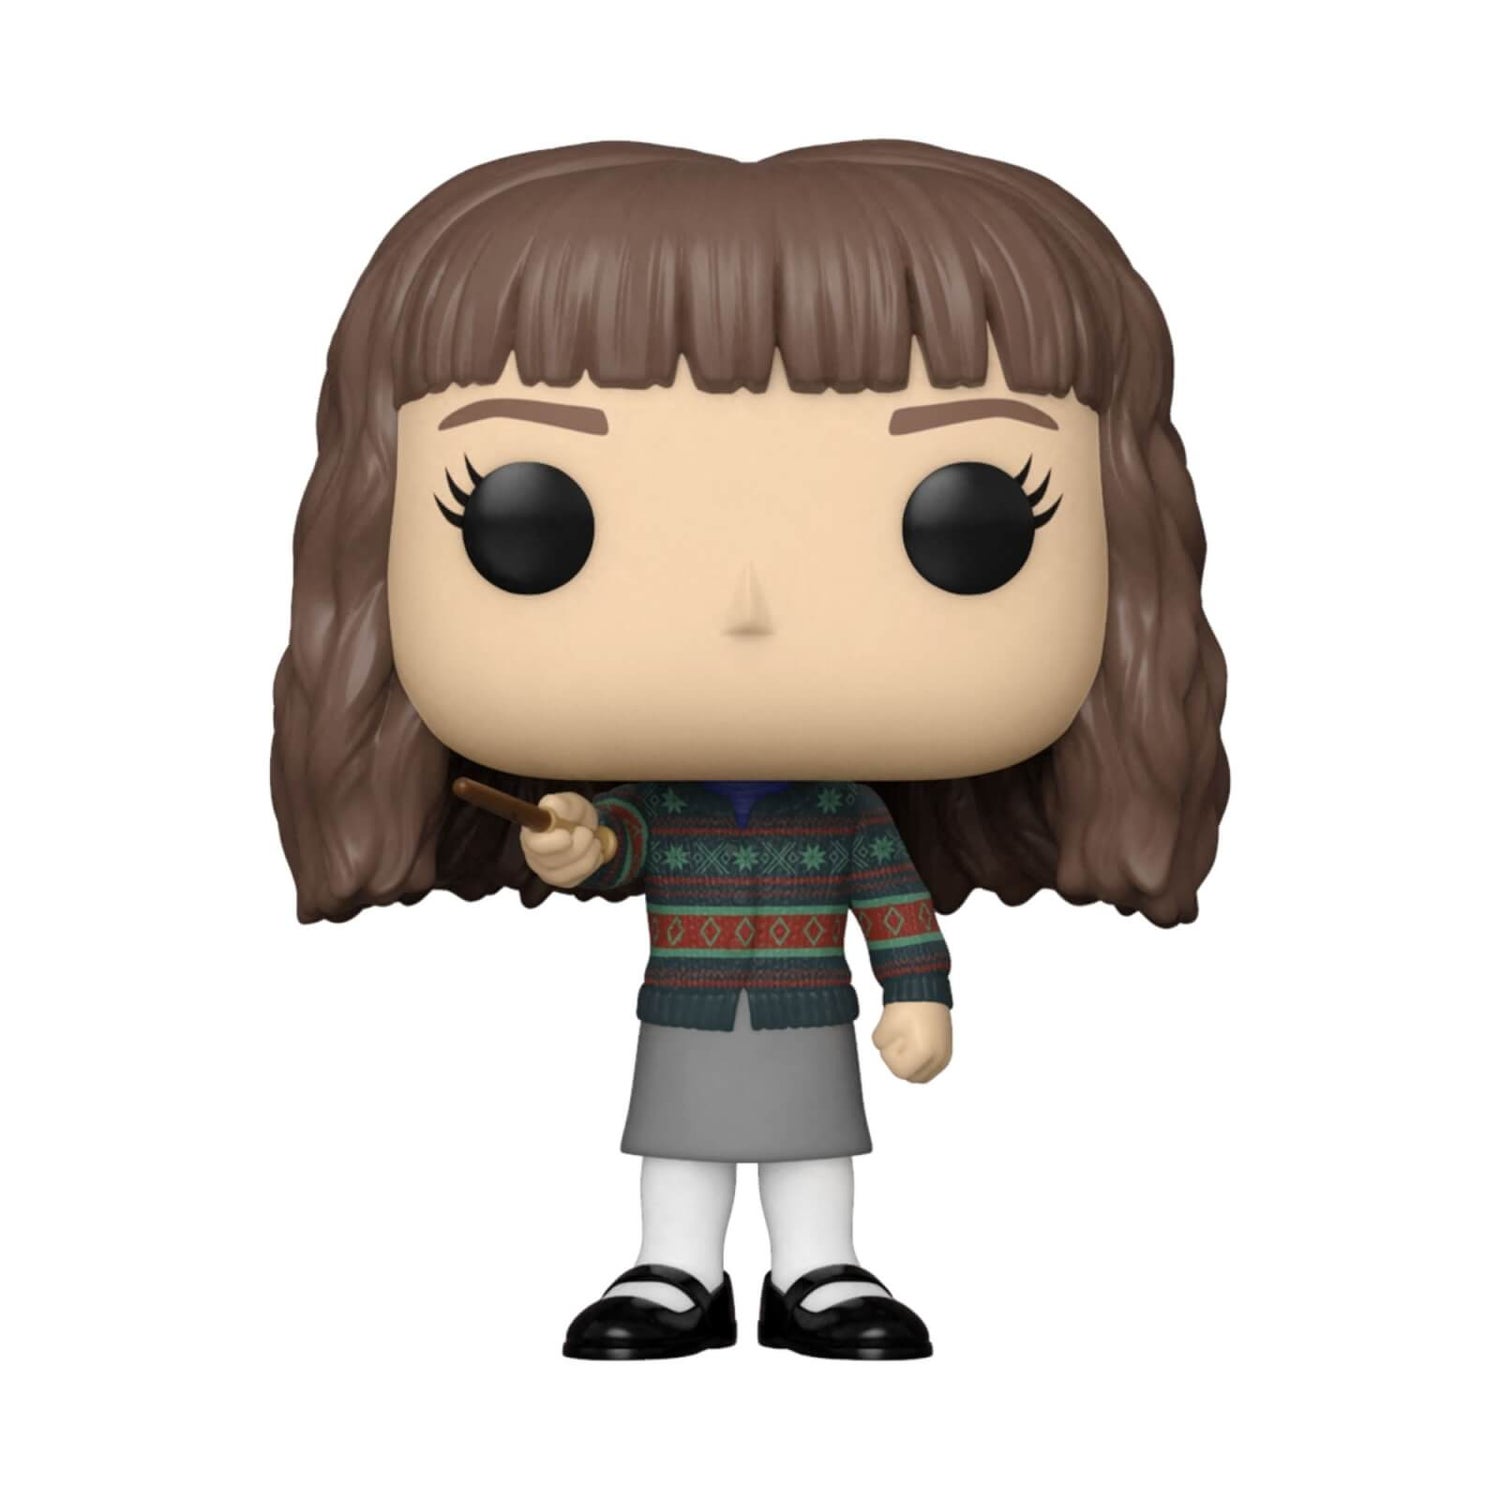 Harry Potter Anniversary Hermione with Wand Funko Pop! Vinyl